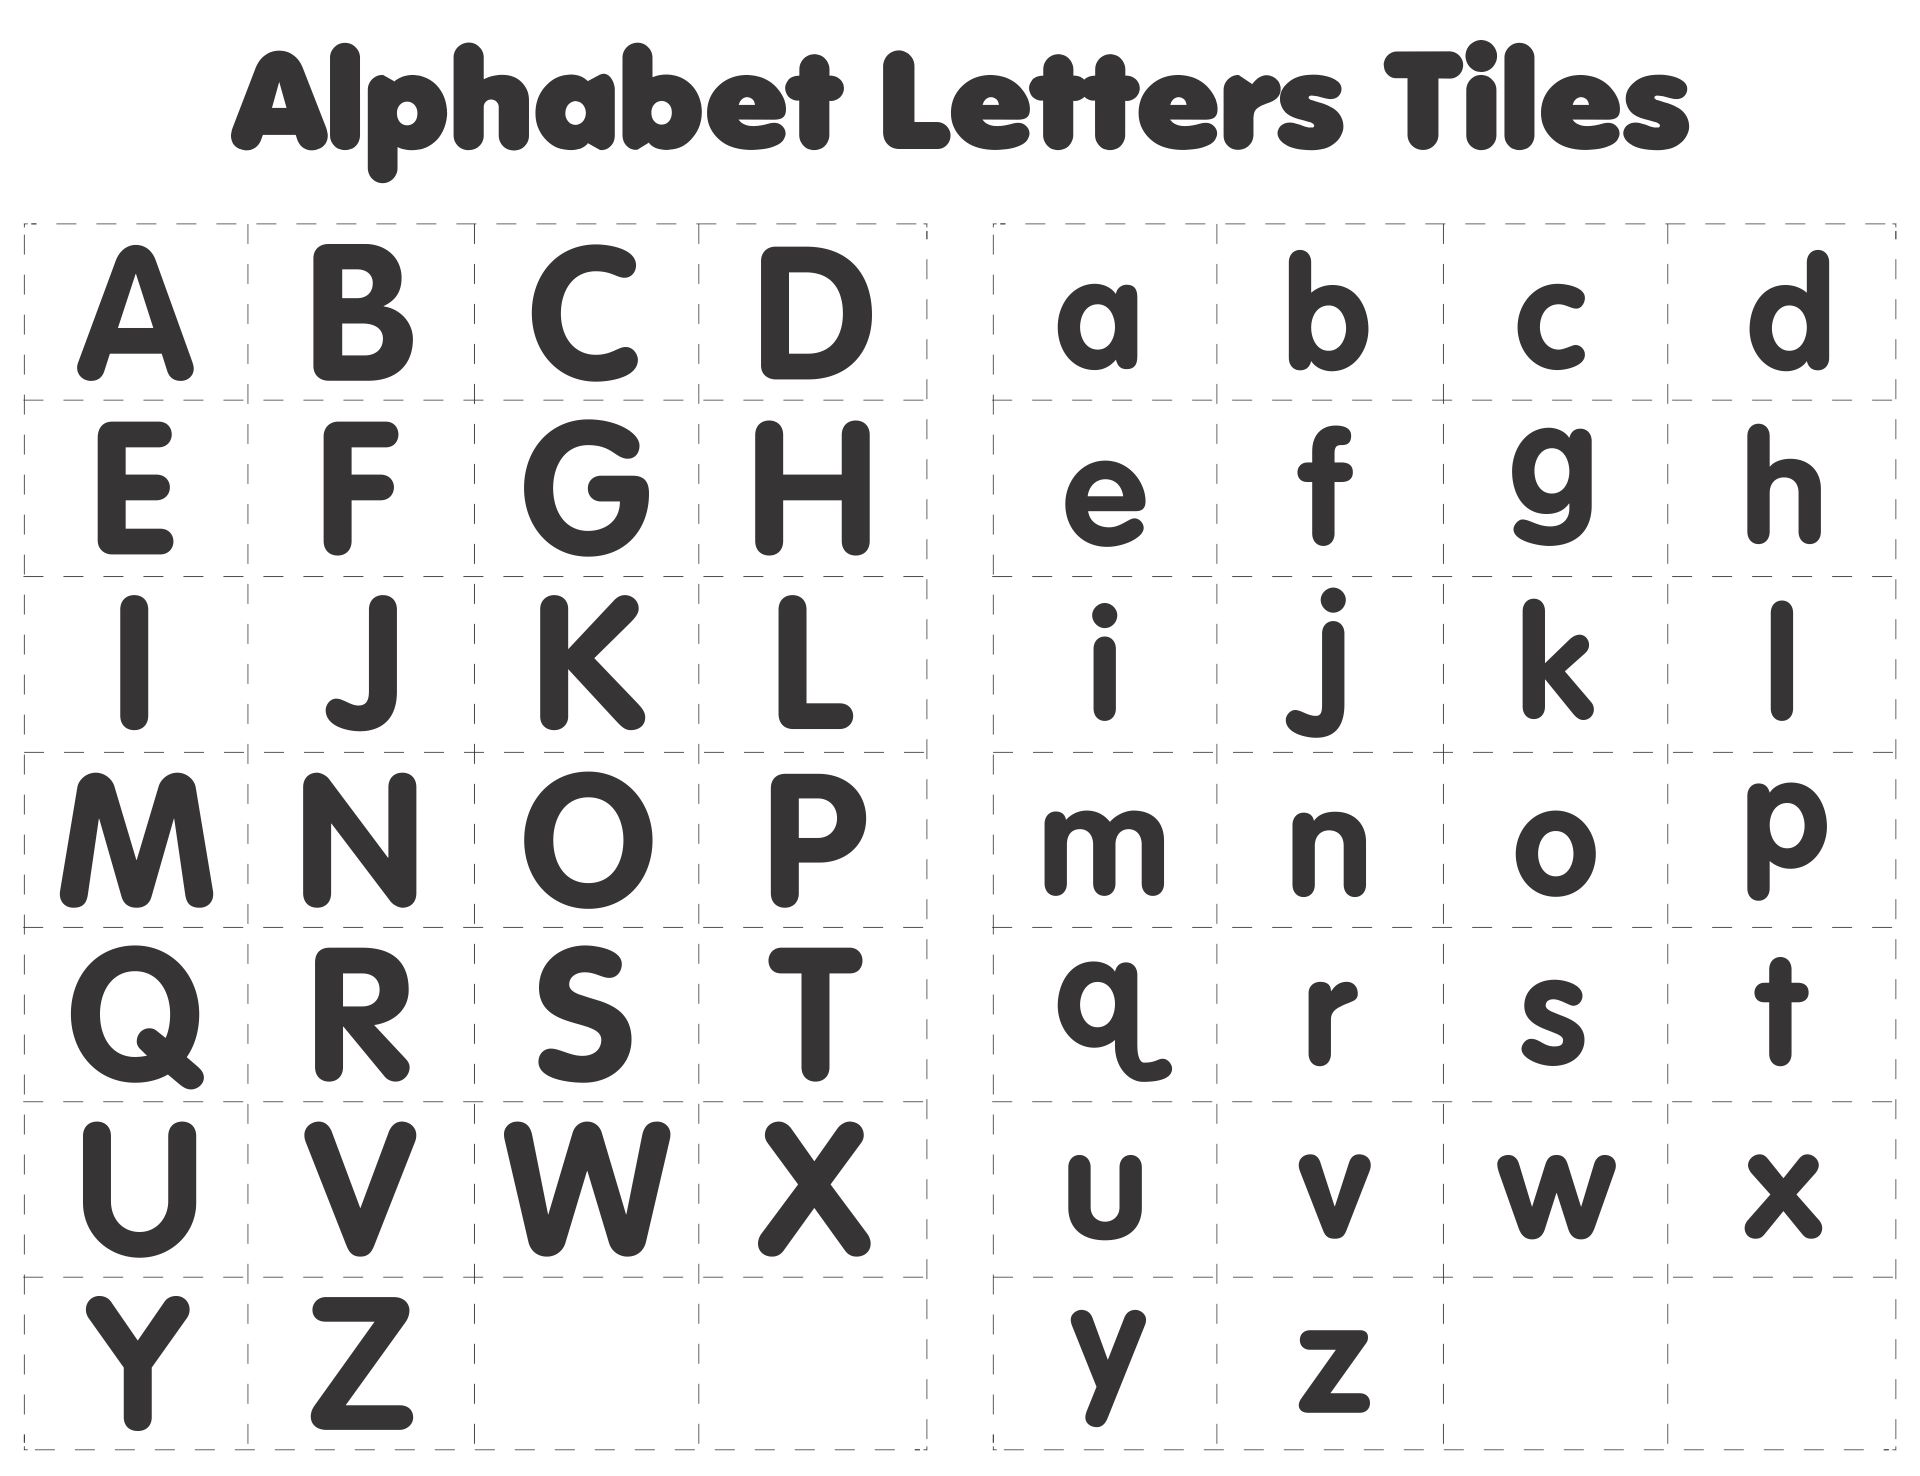 azirtips-cracking-the-there-only-26-letters-in-the-alphabet-secret